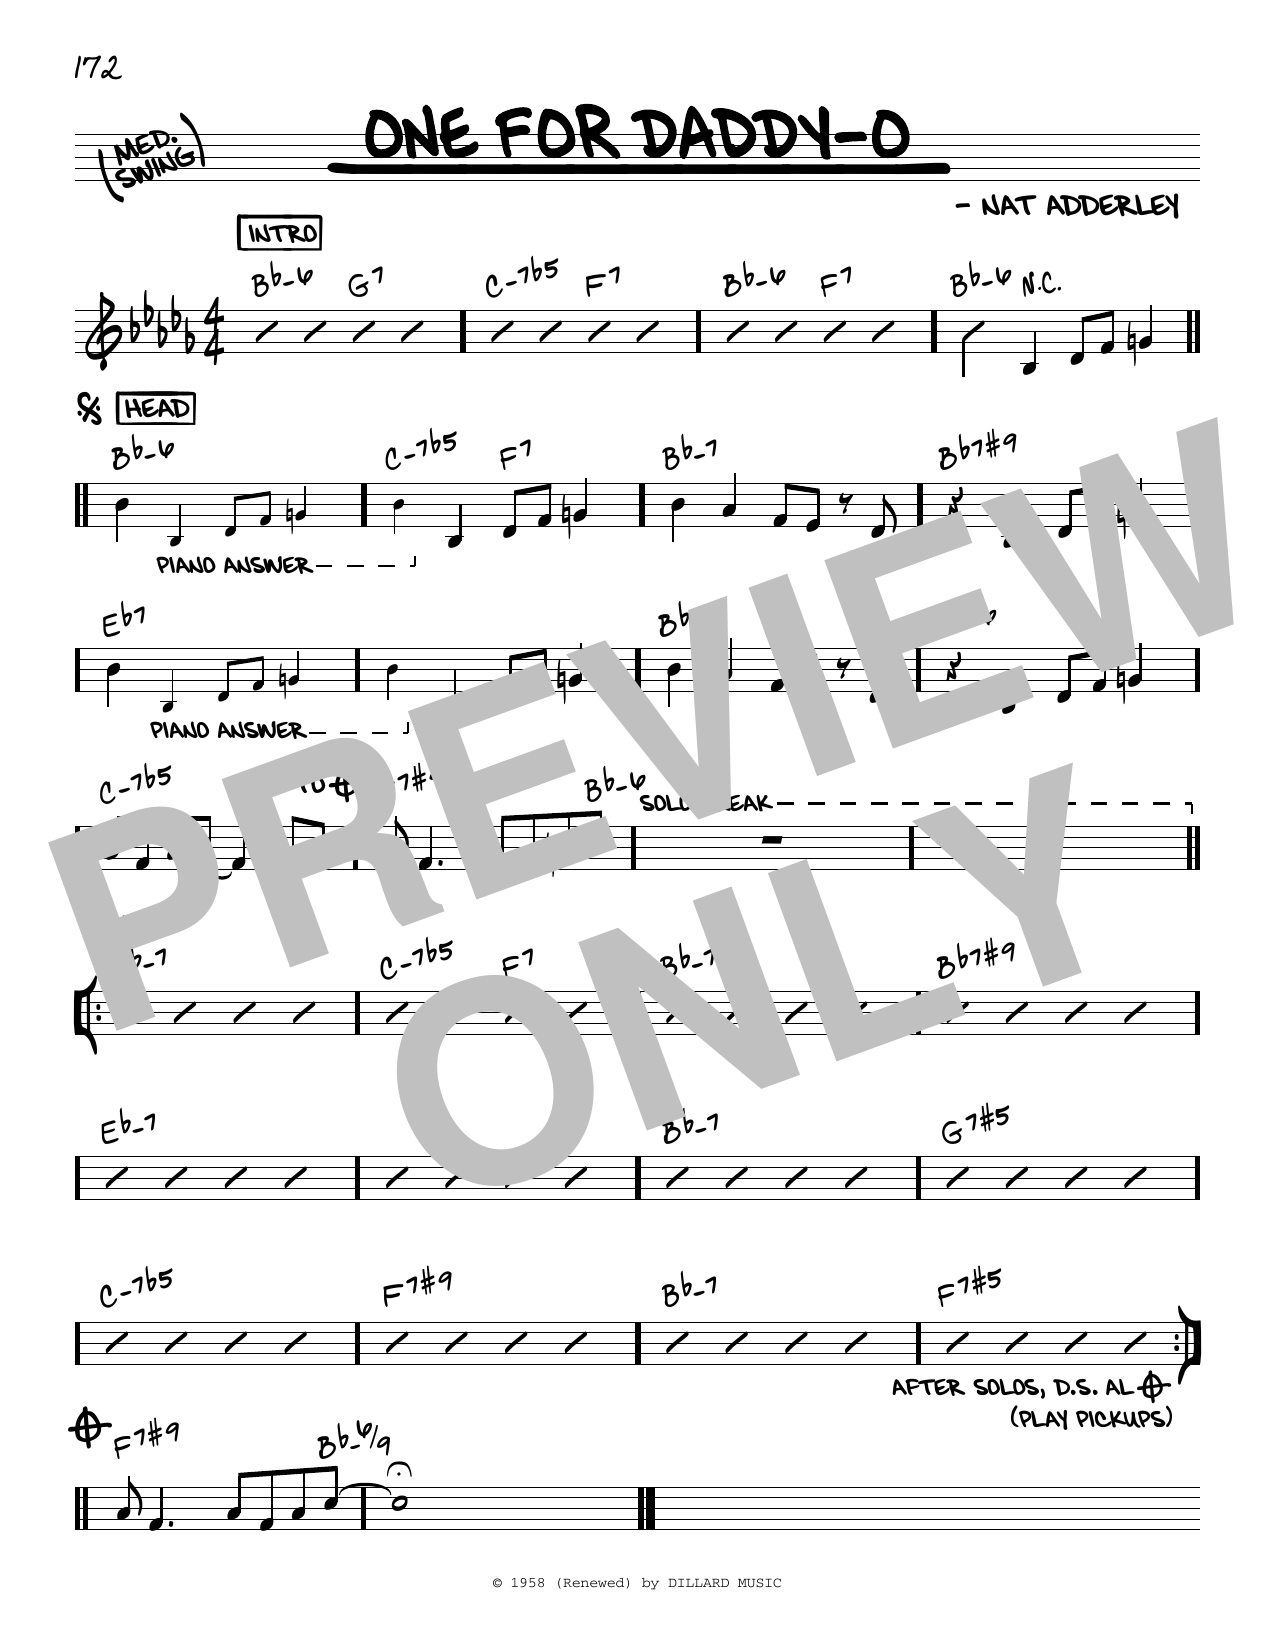 Download Nat Adderley One For Daddy-O Sheet Music